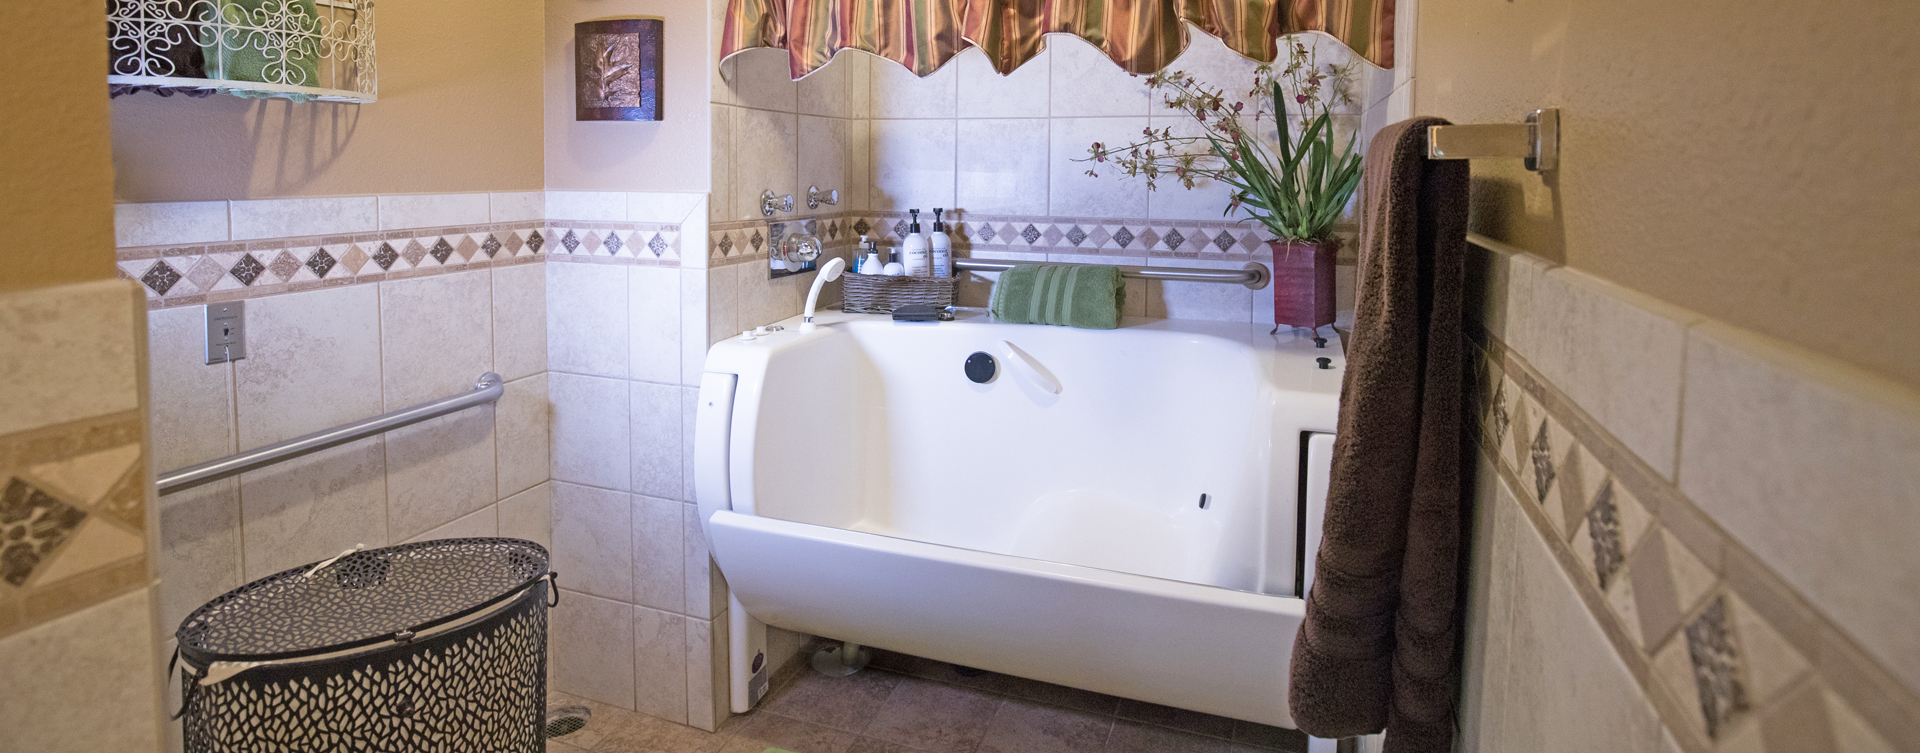 With an easy access design, our whirlpool allows you to enjoy a warm bath safely and comfortably at Bickford of Quincy